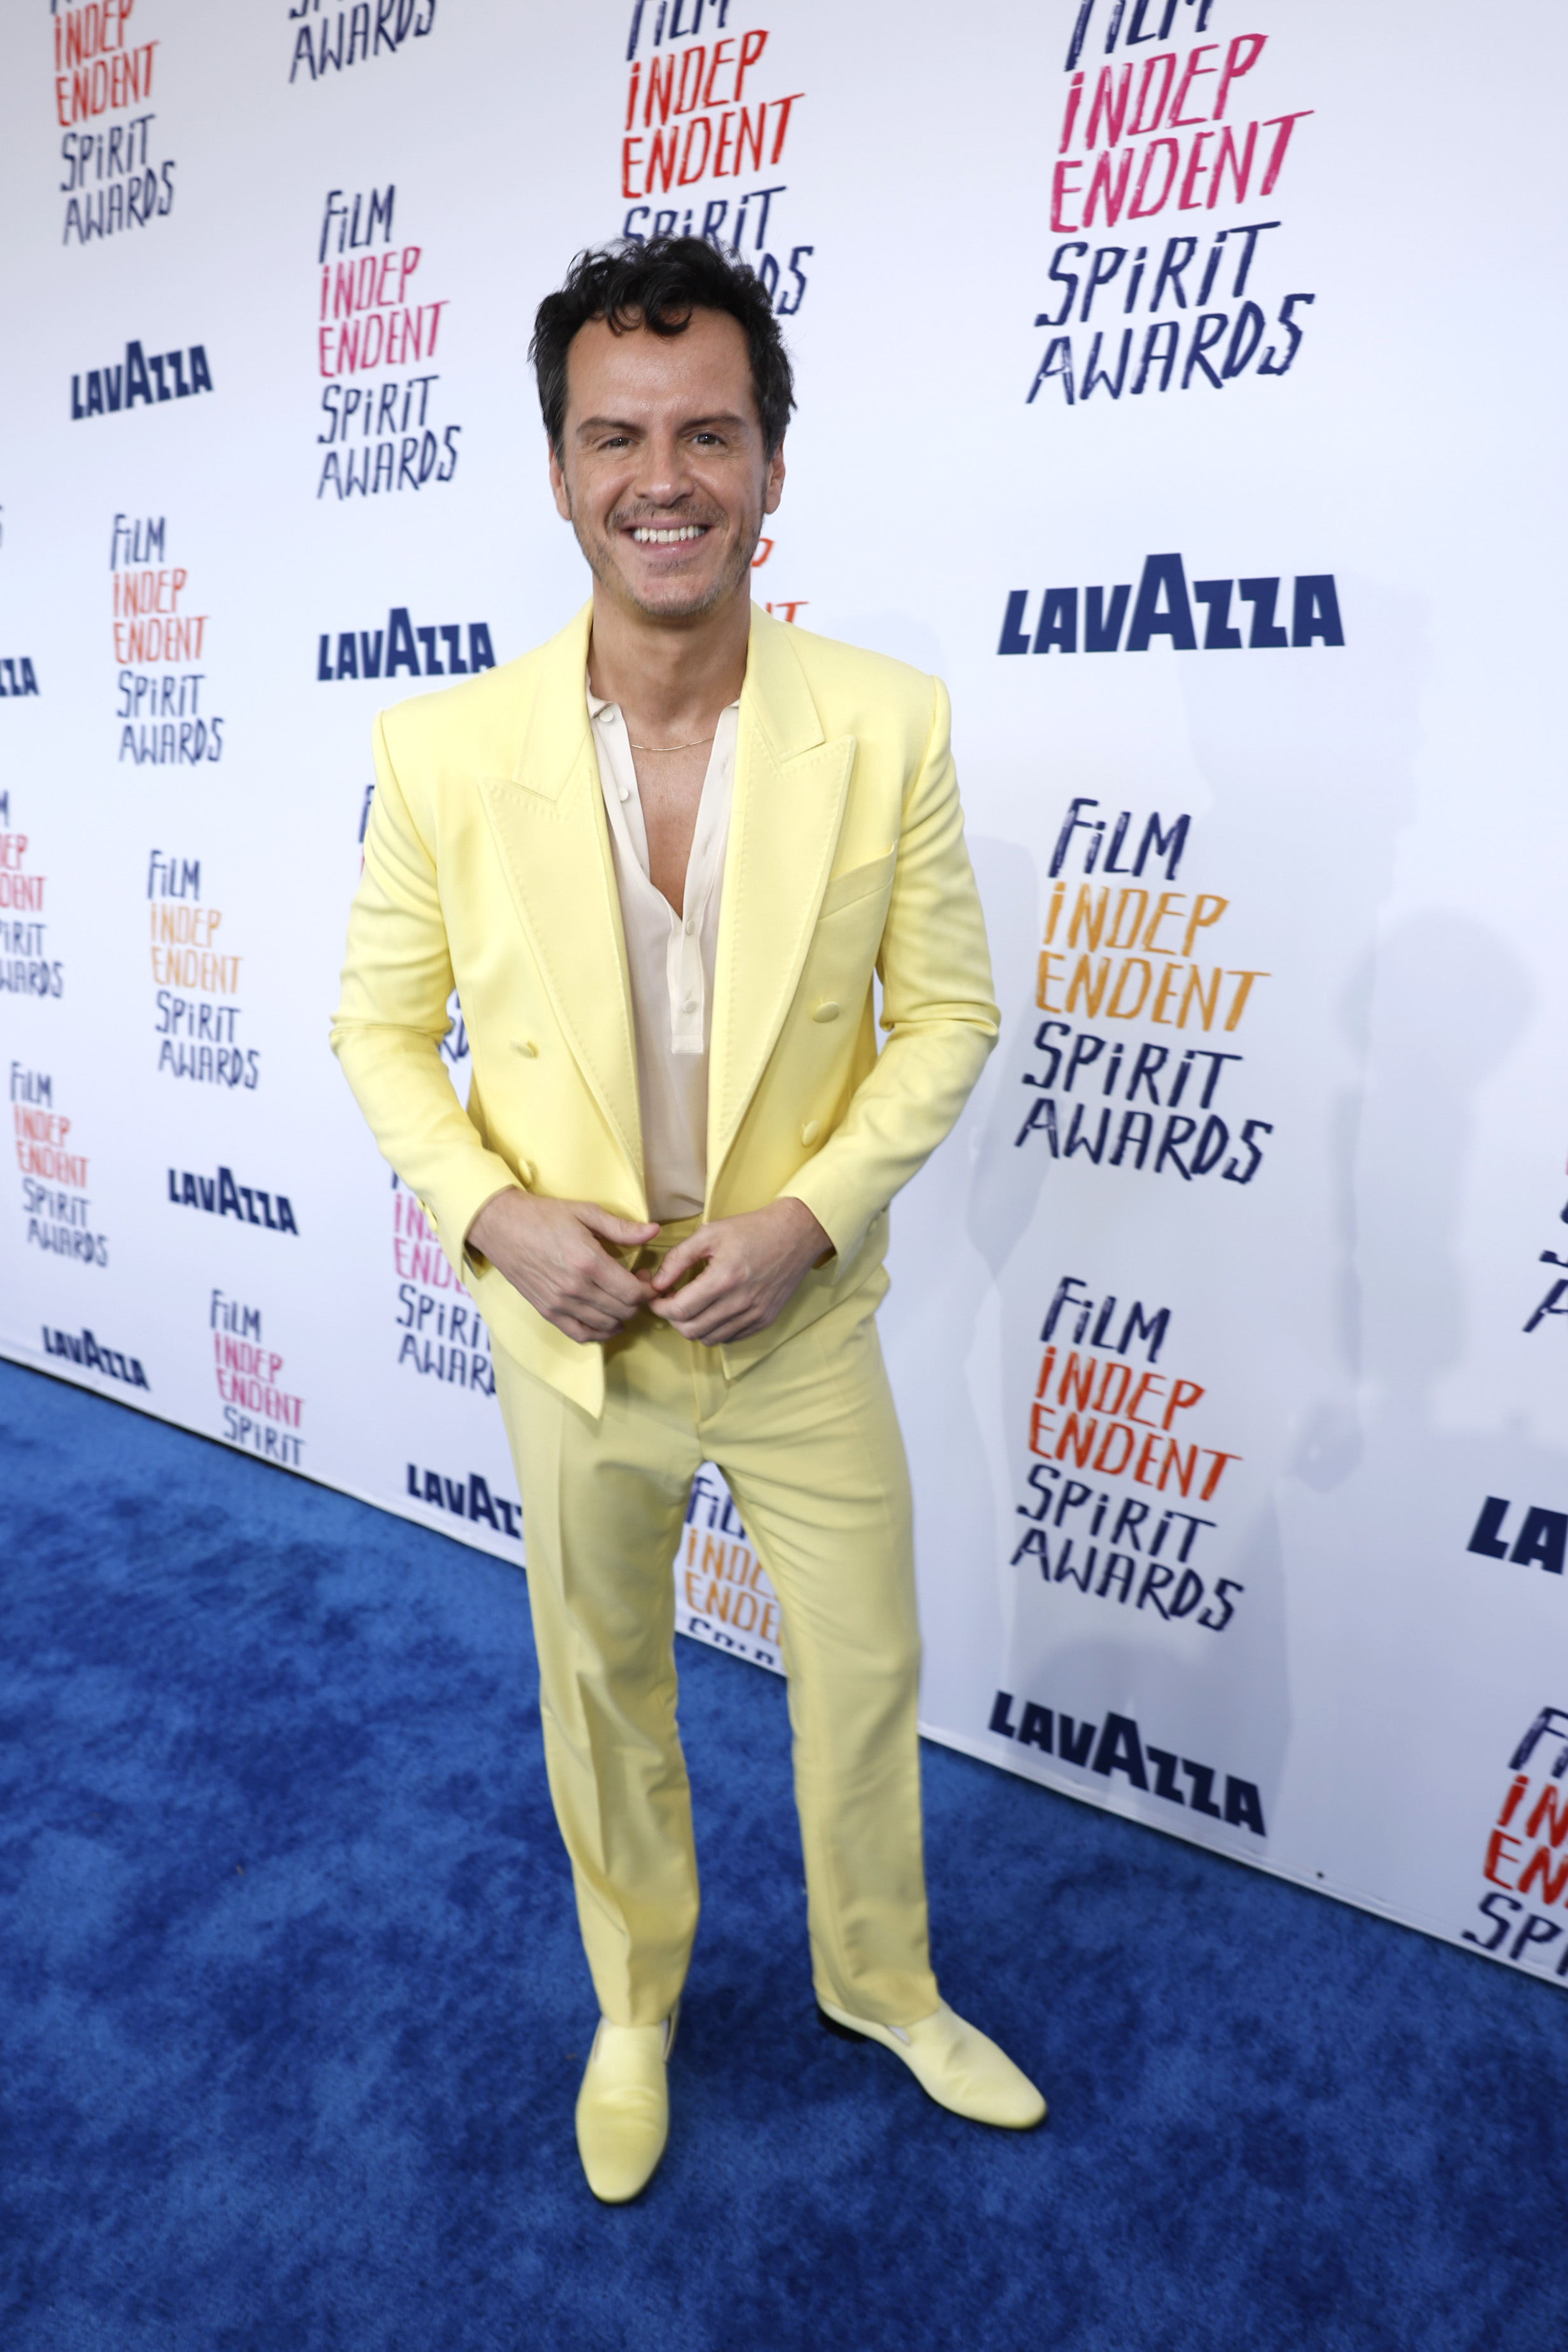 Andrew in a pastel suit smiling at the Film Independent Spirit Awards